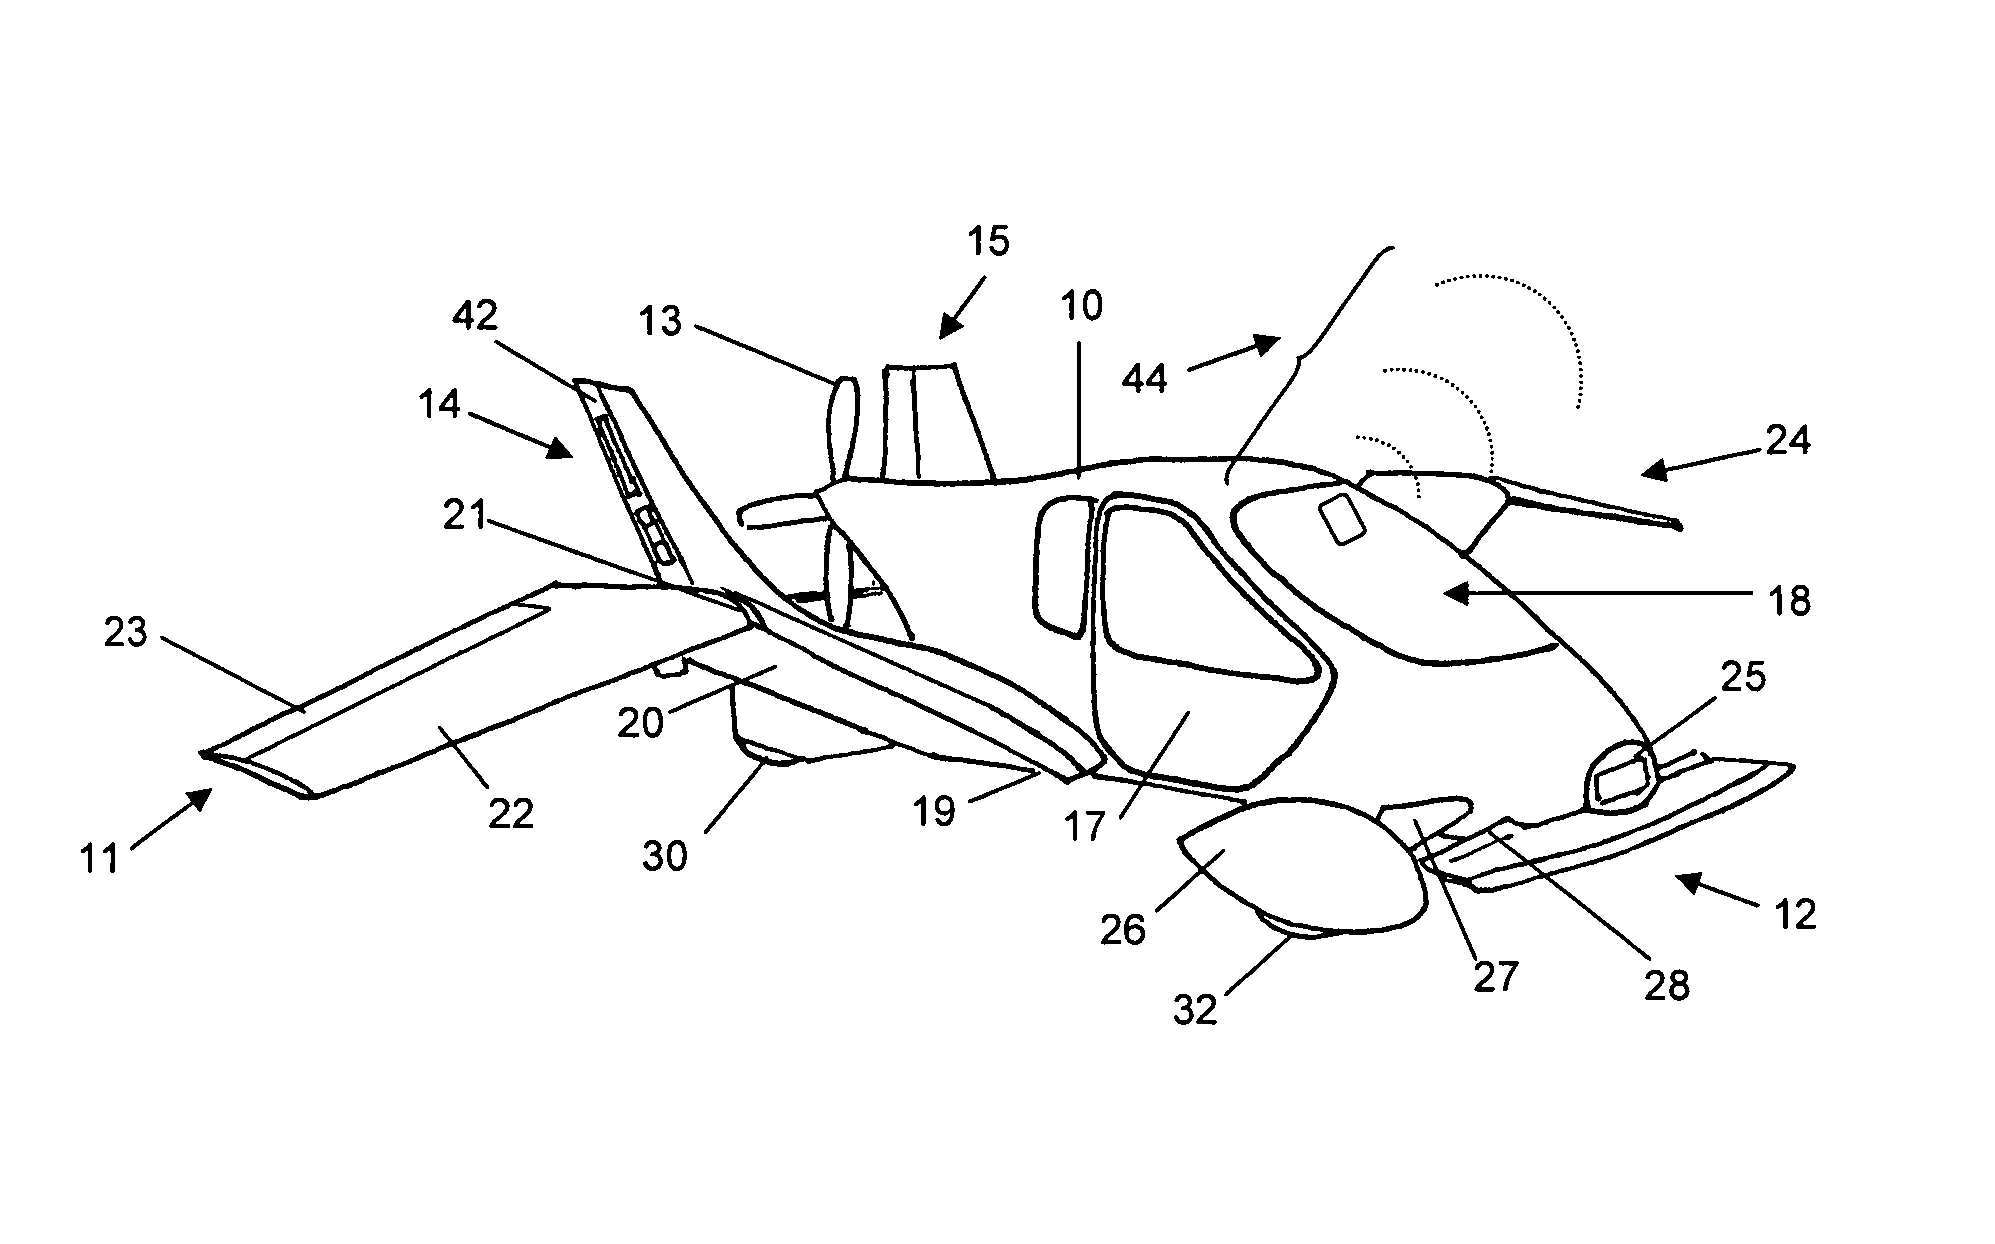 Roadable aircraft with folding wings and integrated bumpers and lighting